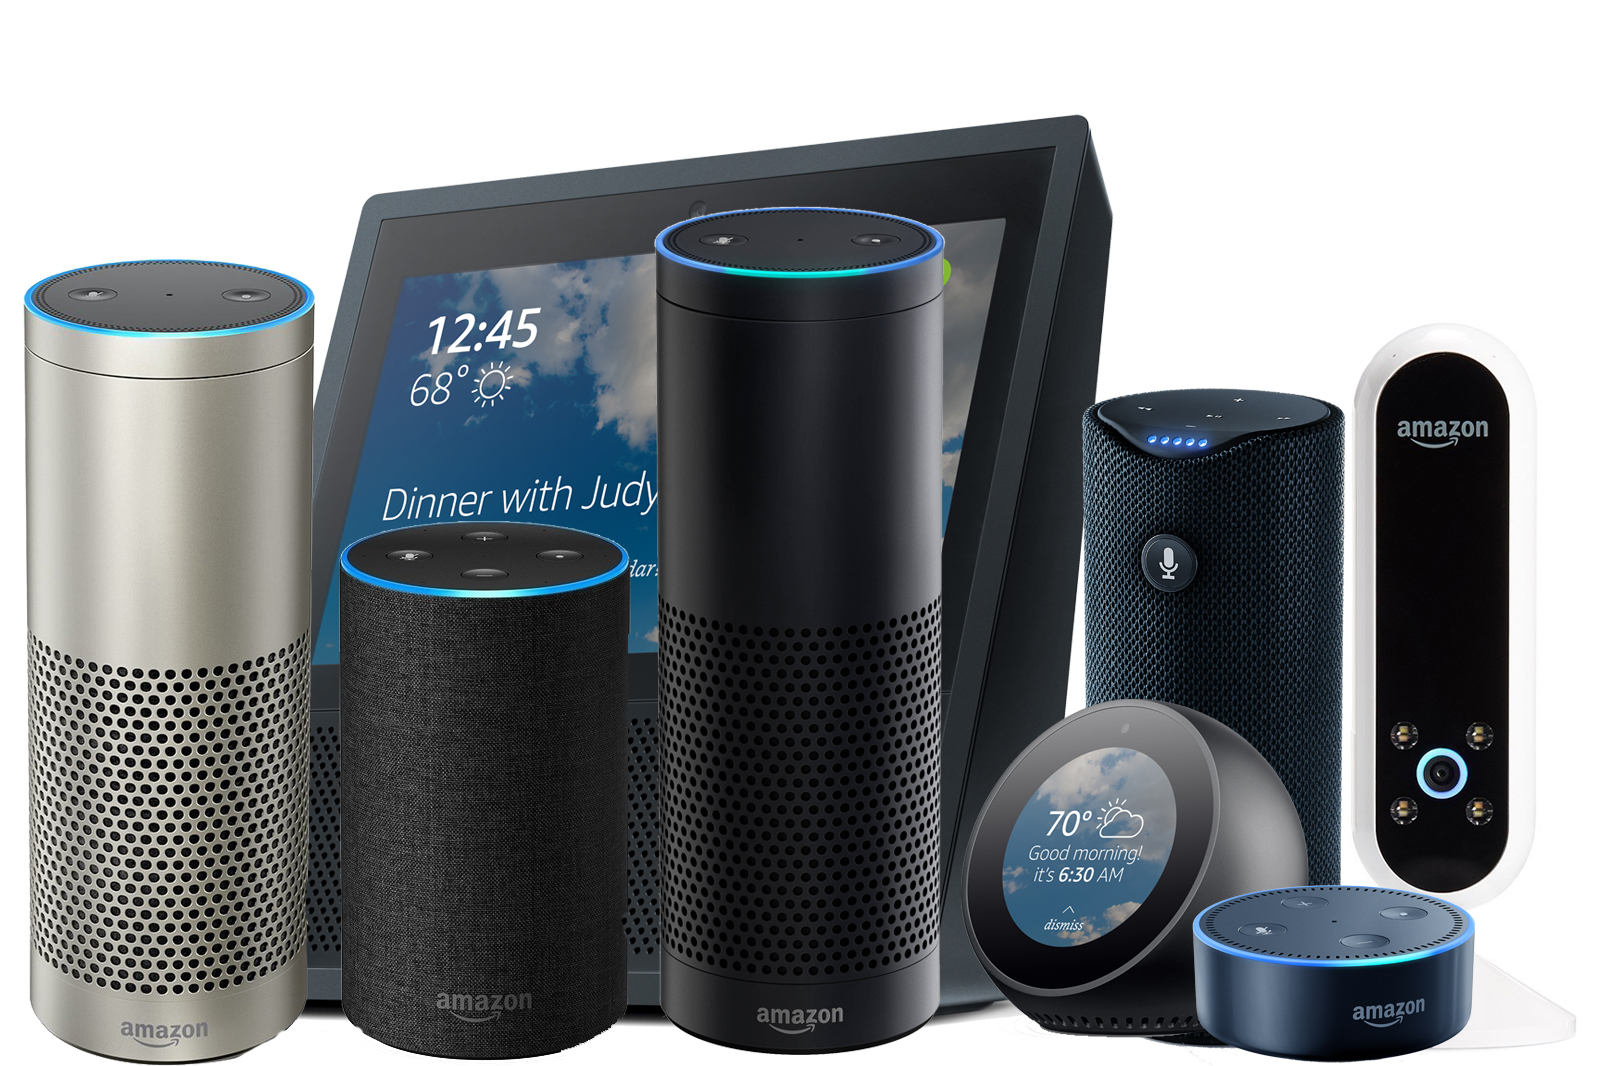 Why Amazon Released So Many New Alexa Connected Devices